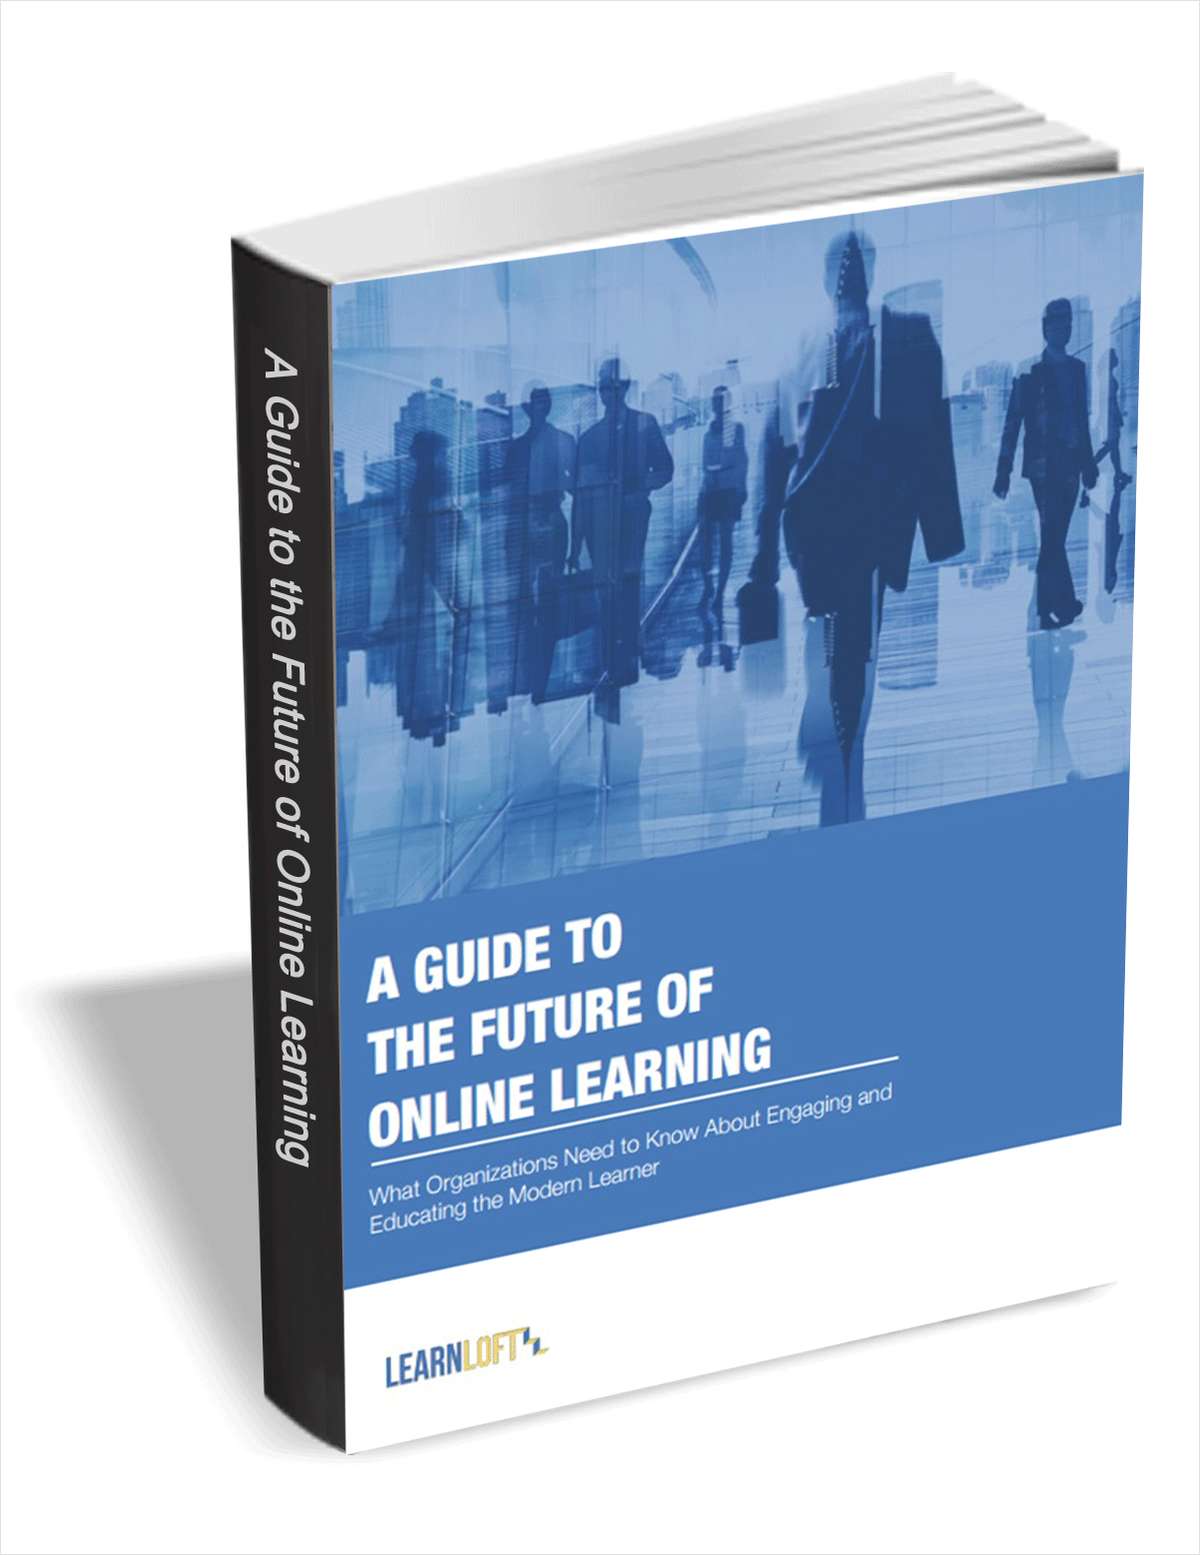 A Guide to the Future of Online Learning - What Organizations Need to Know About Engaging and Educating the Modern Learner